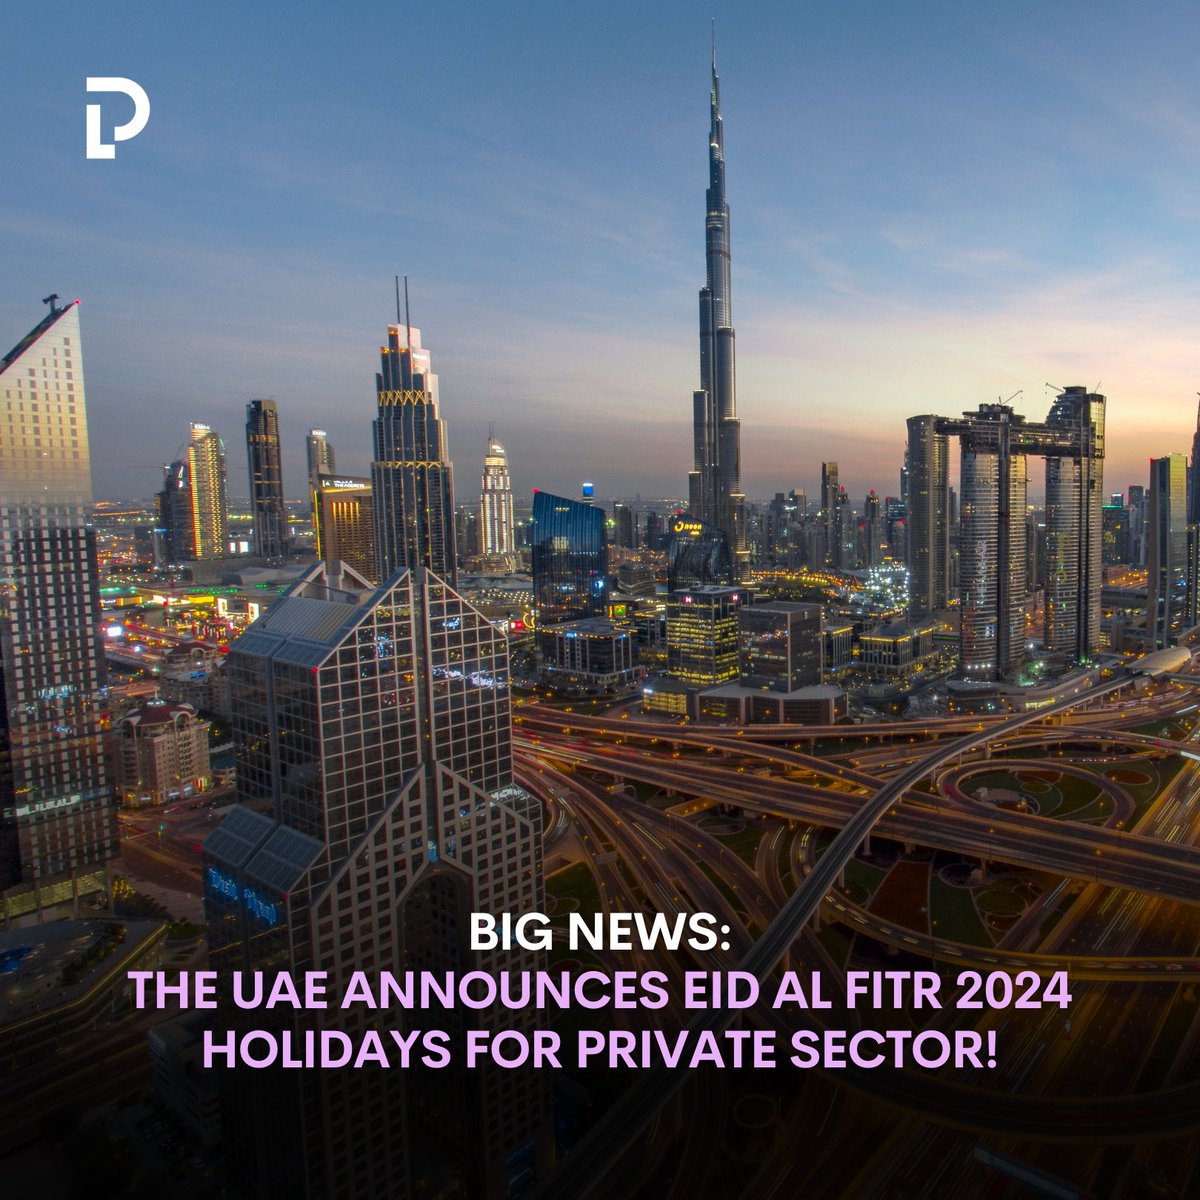 💫 The UAE officially announces the Eid Al Fitr holidays for the private sector starting from Monday, April 8th! Keep an eye out for more information! 🔔